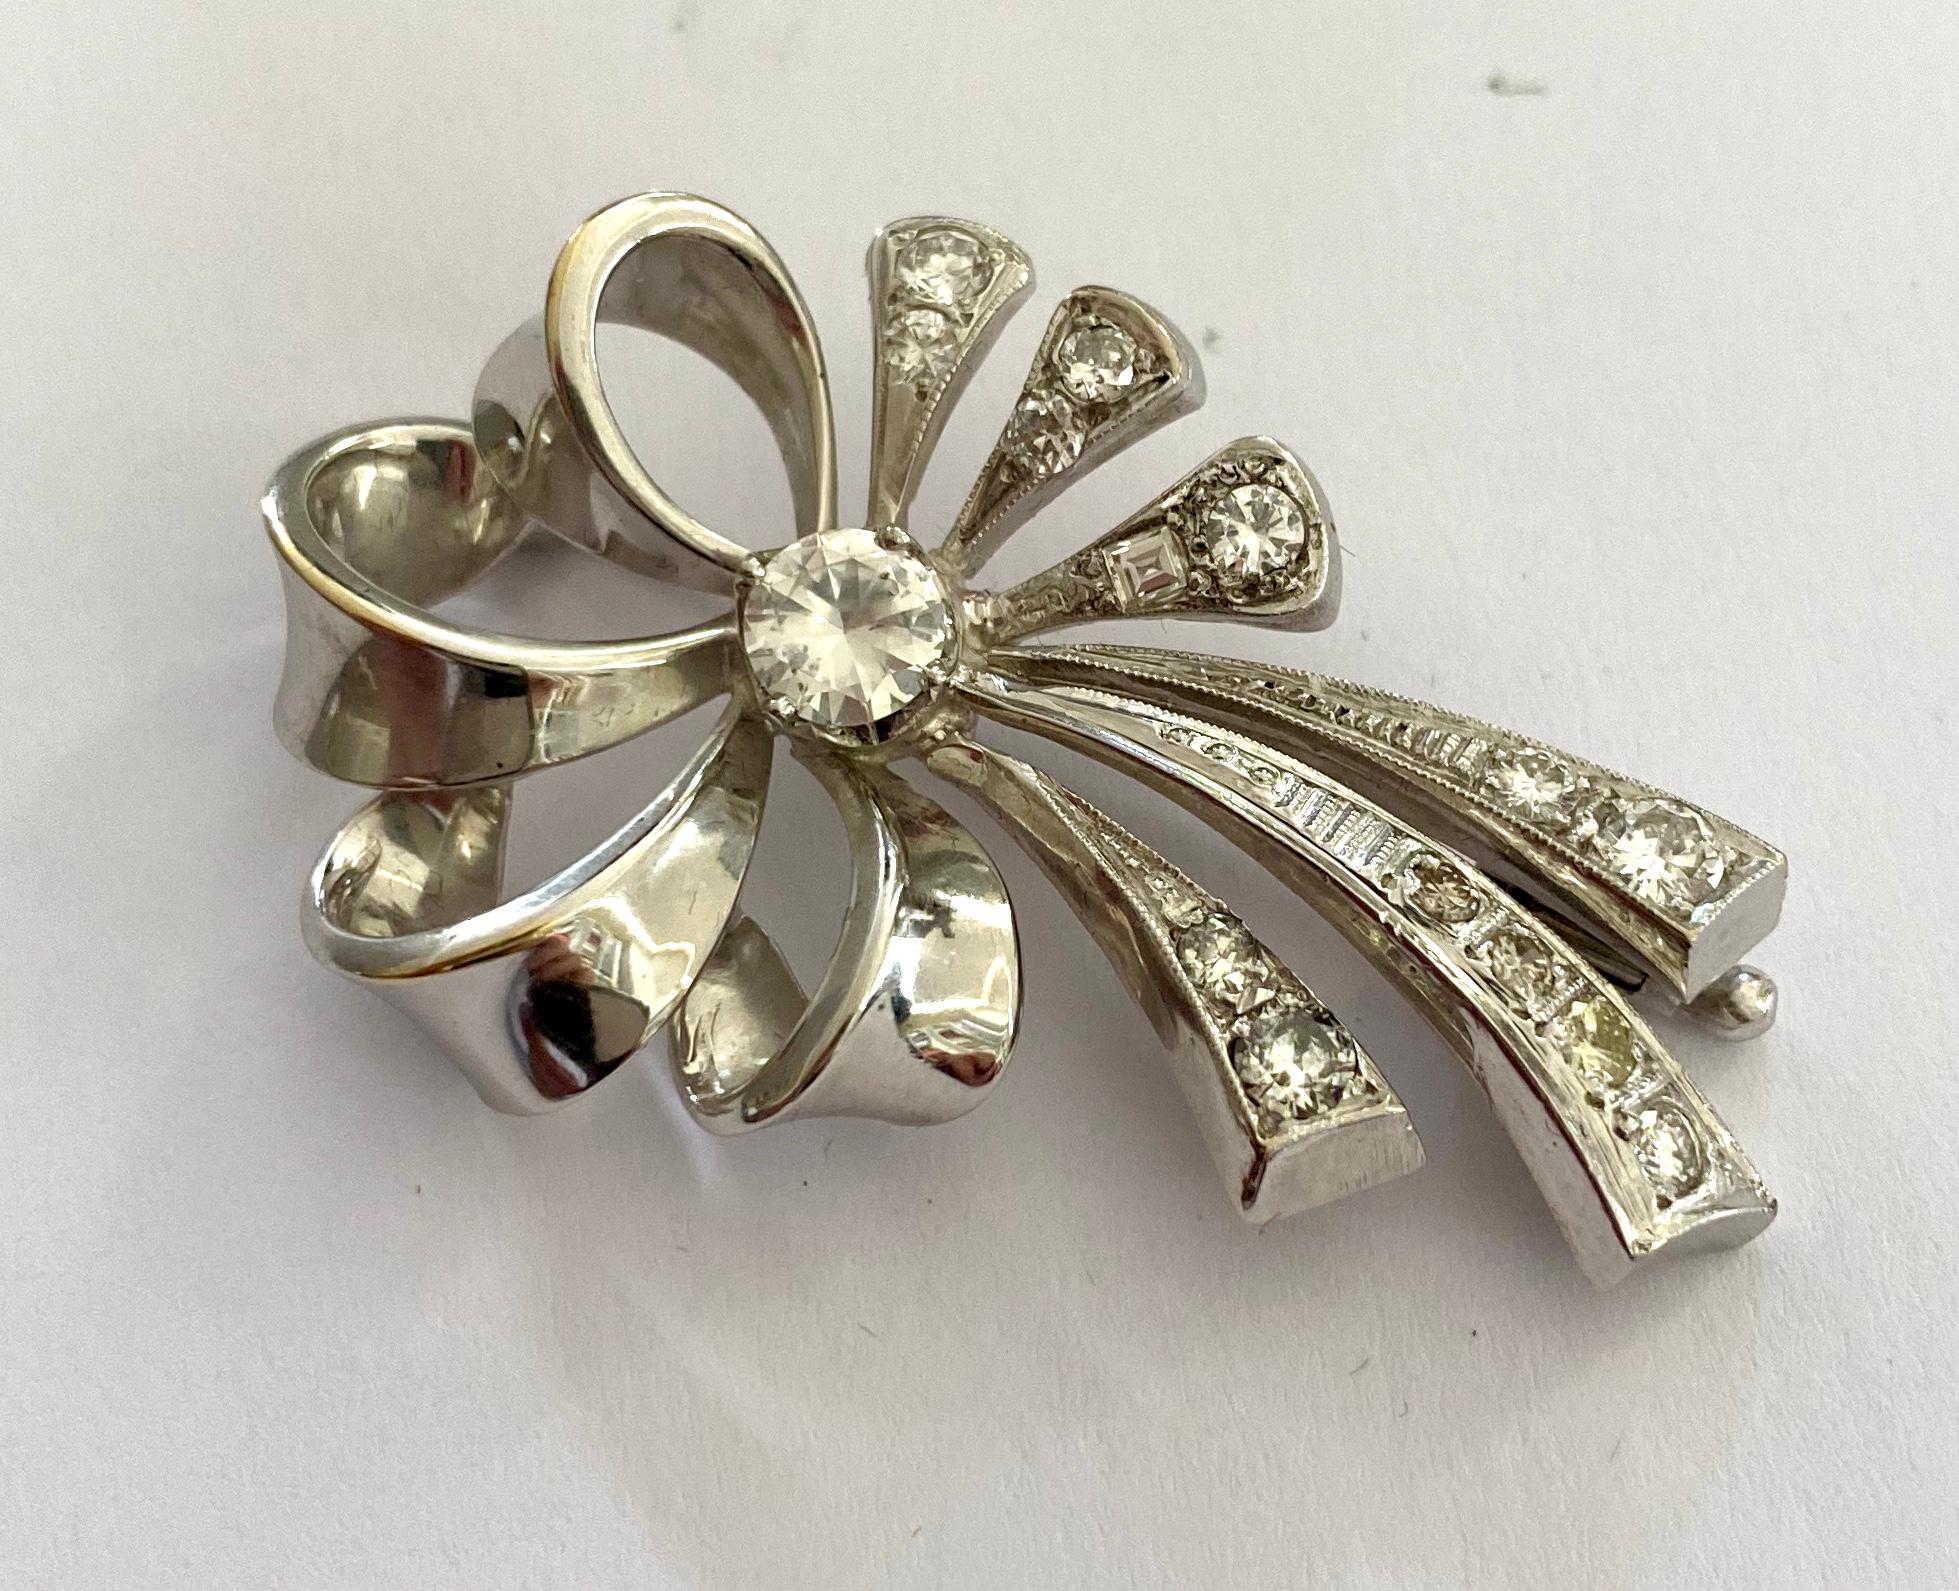 One (1) 14K. white Gold Bow Brooch, made in Holland ca. 1950
set with:
One (1) Round Brilliant Cut Diamond: 0.56 ct SI2 - G
Fourteen (14) roud Brilliant and Baquette cut diamonds: 0.93 ct VS P1 - G-M 
Mesurements of the Brooch: 46 x 28 x 6 mm
Weight